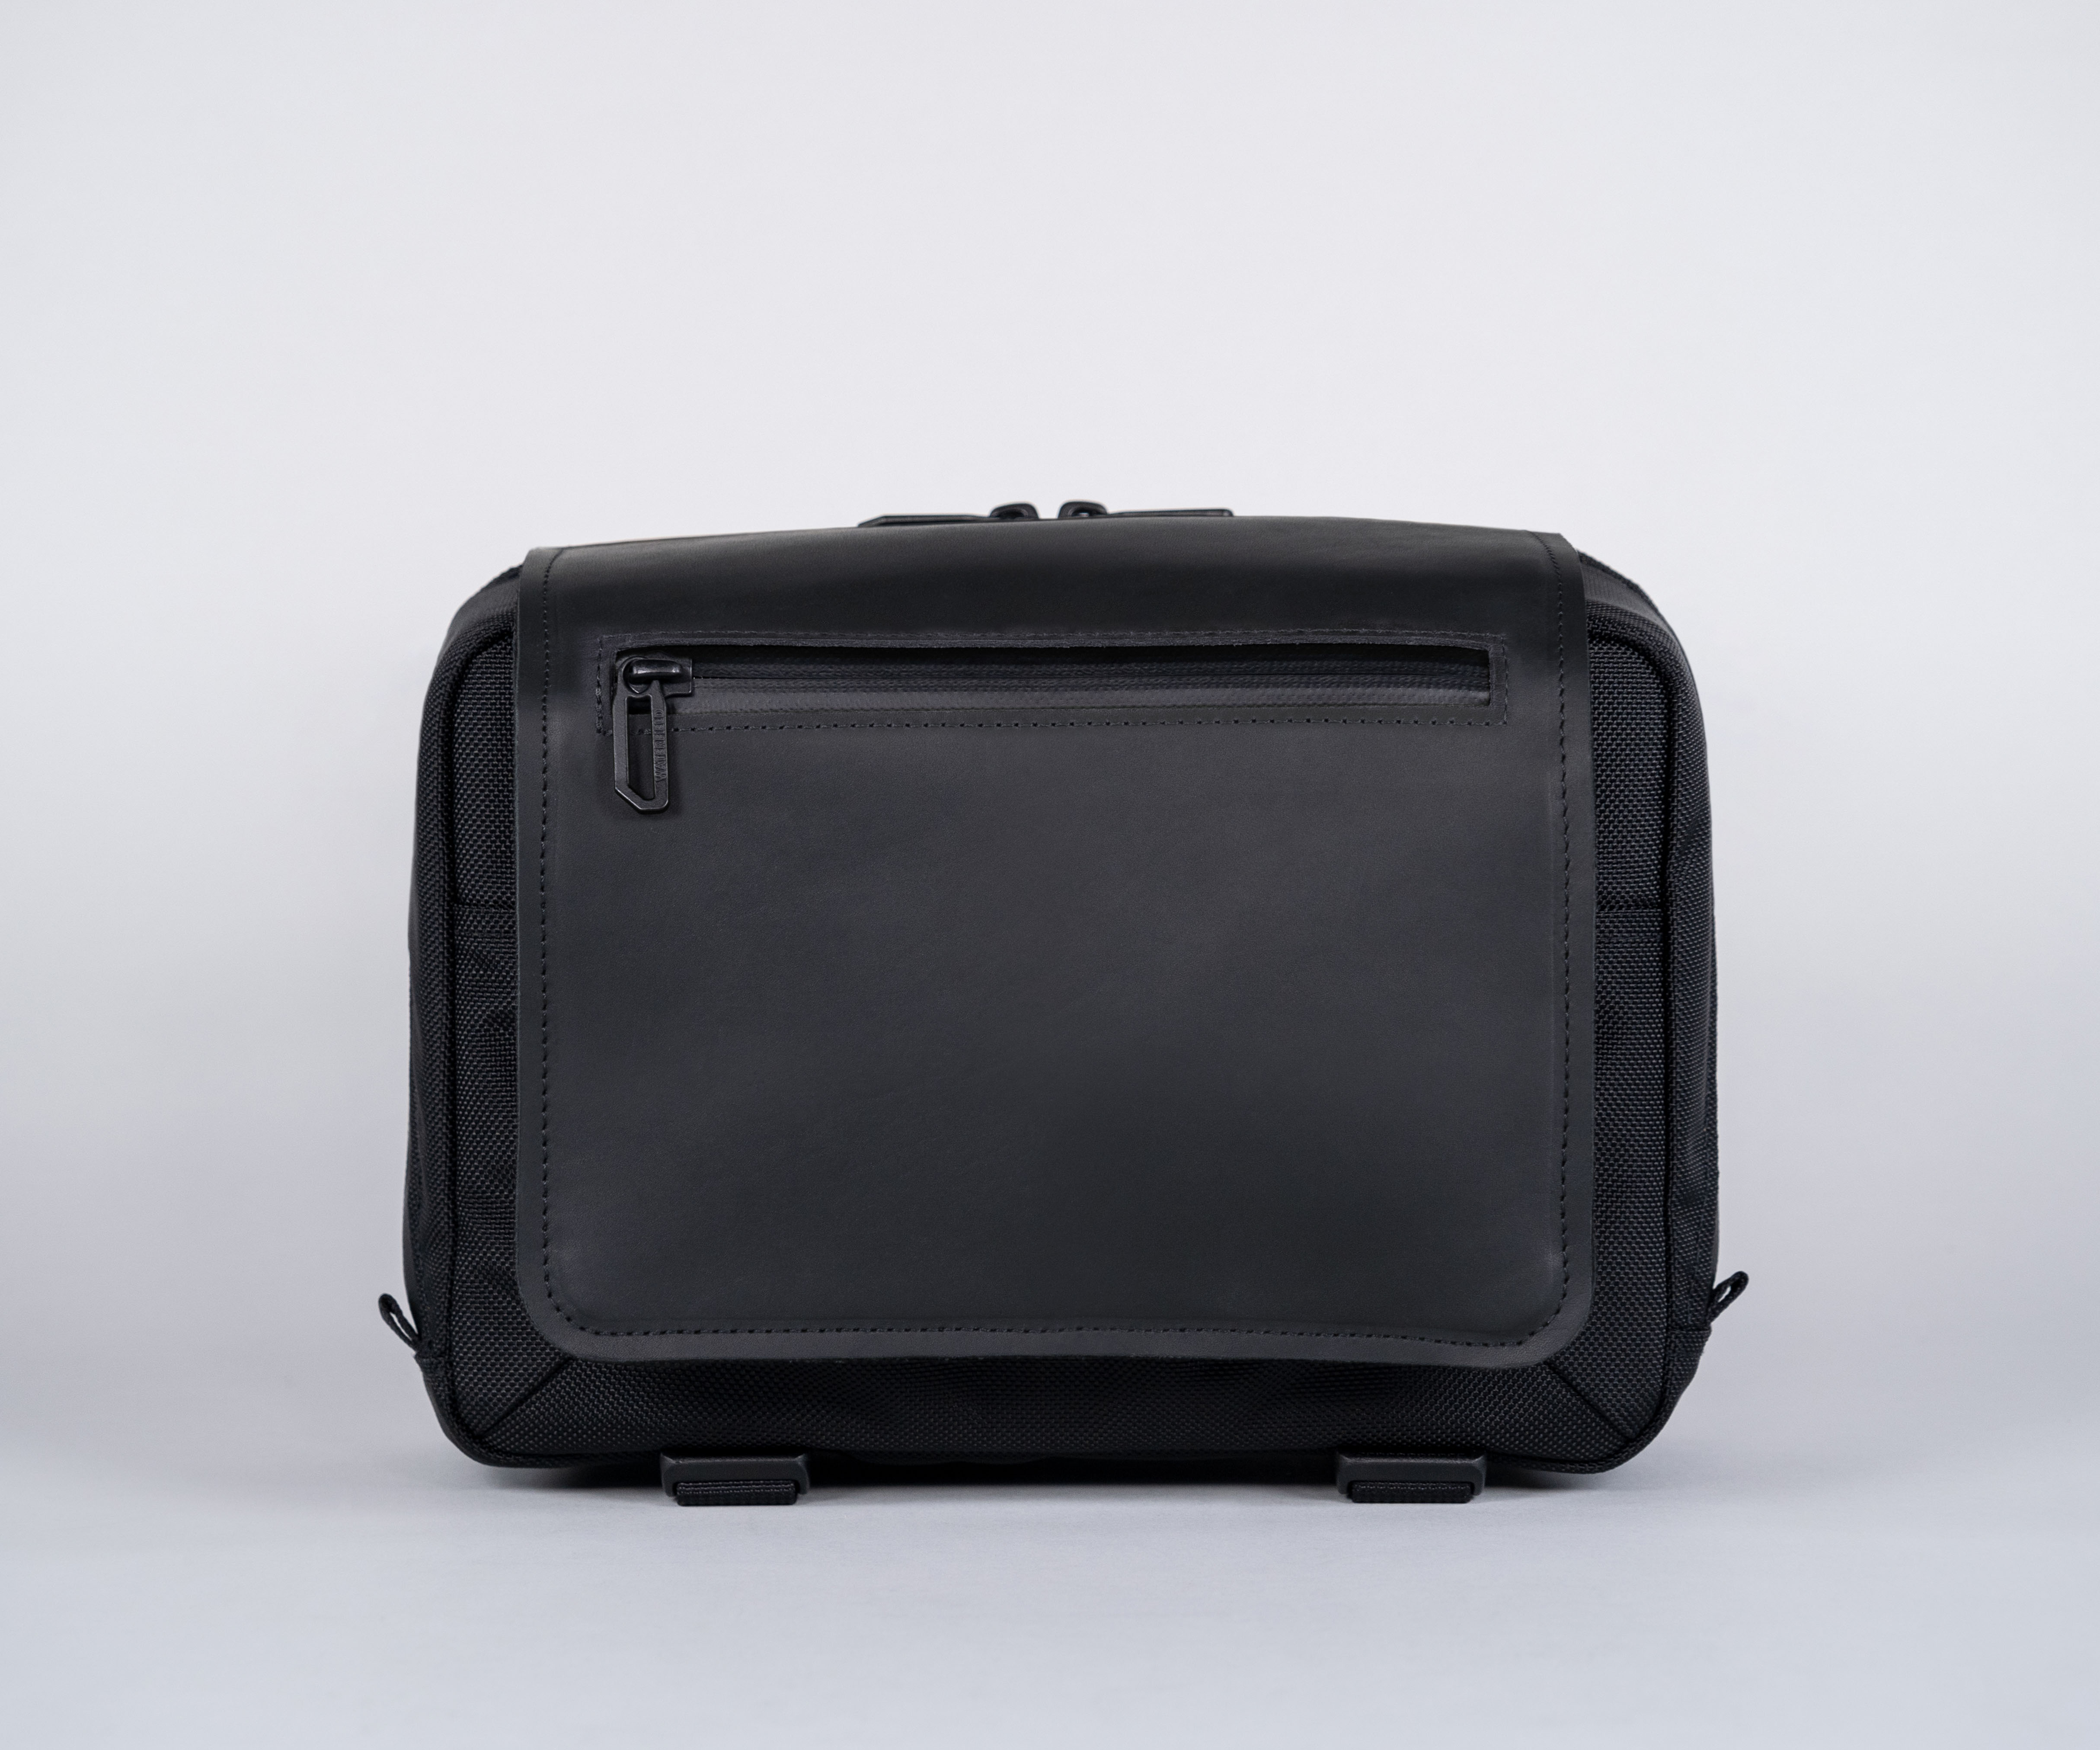 "Compact" size in black full-grain leather and ballistic nylon